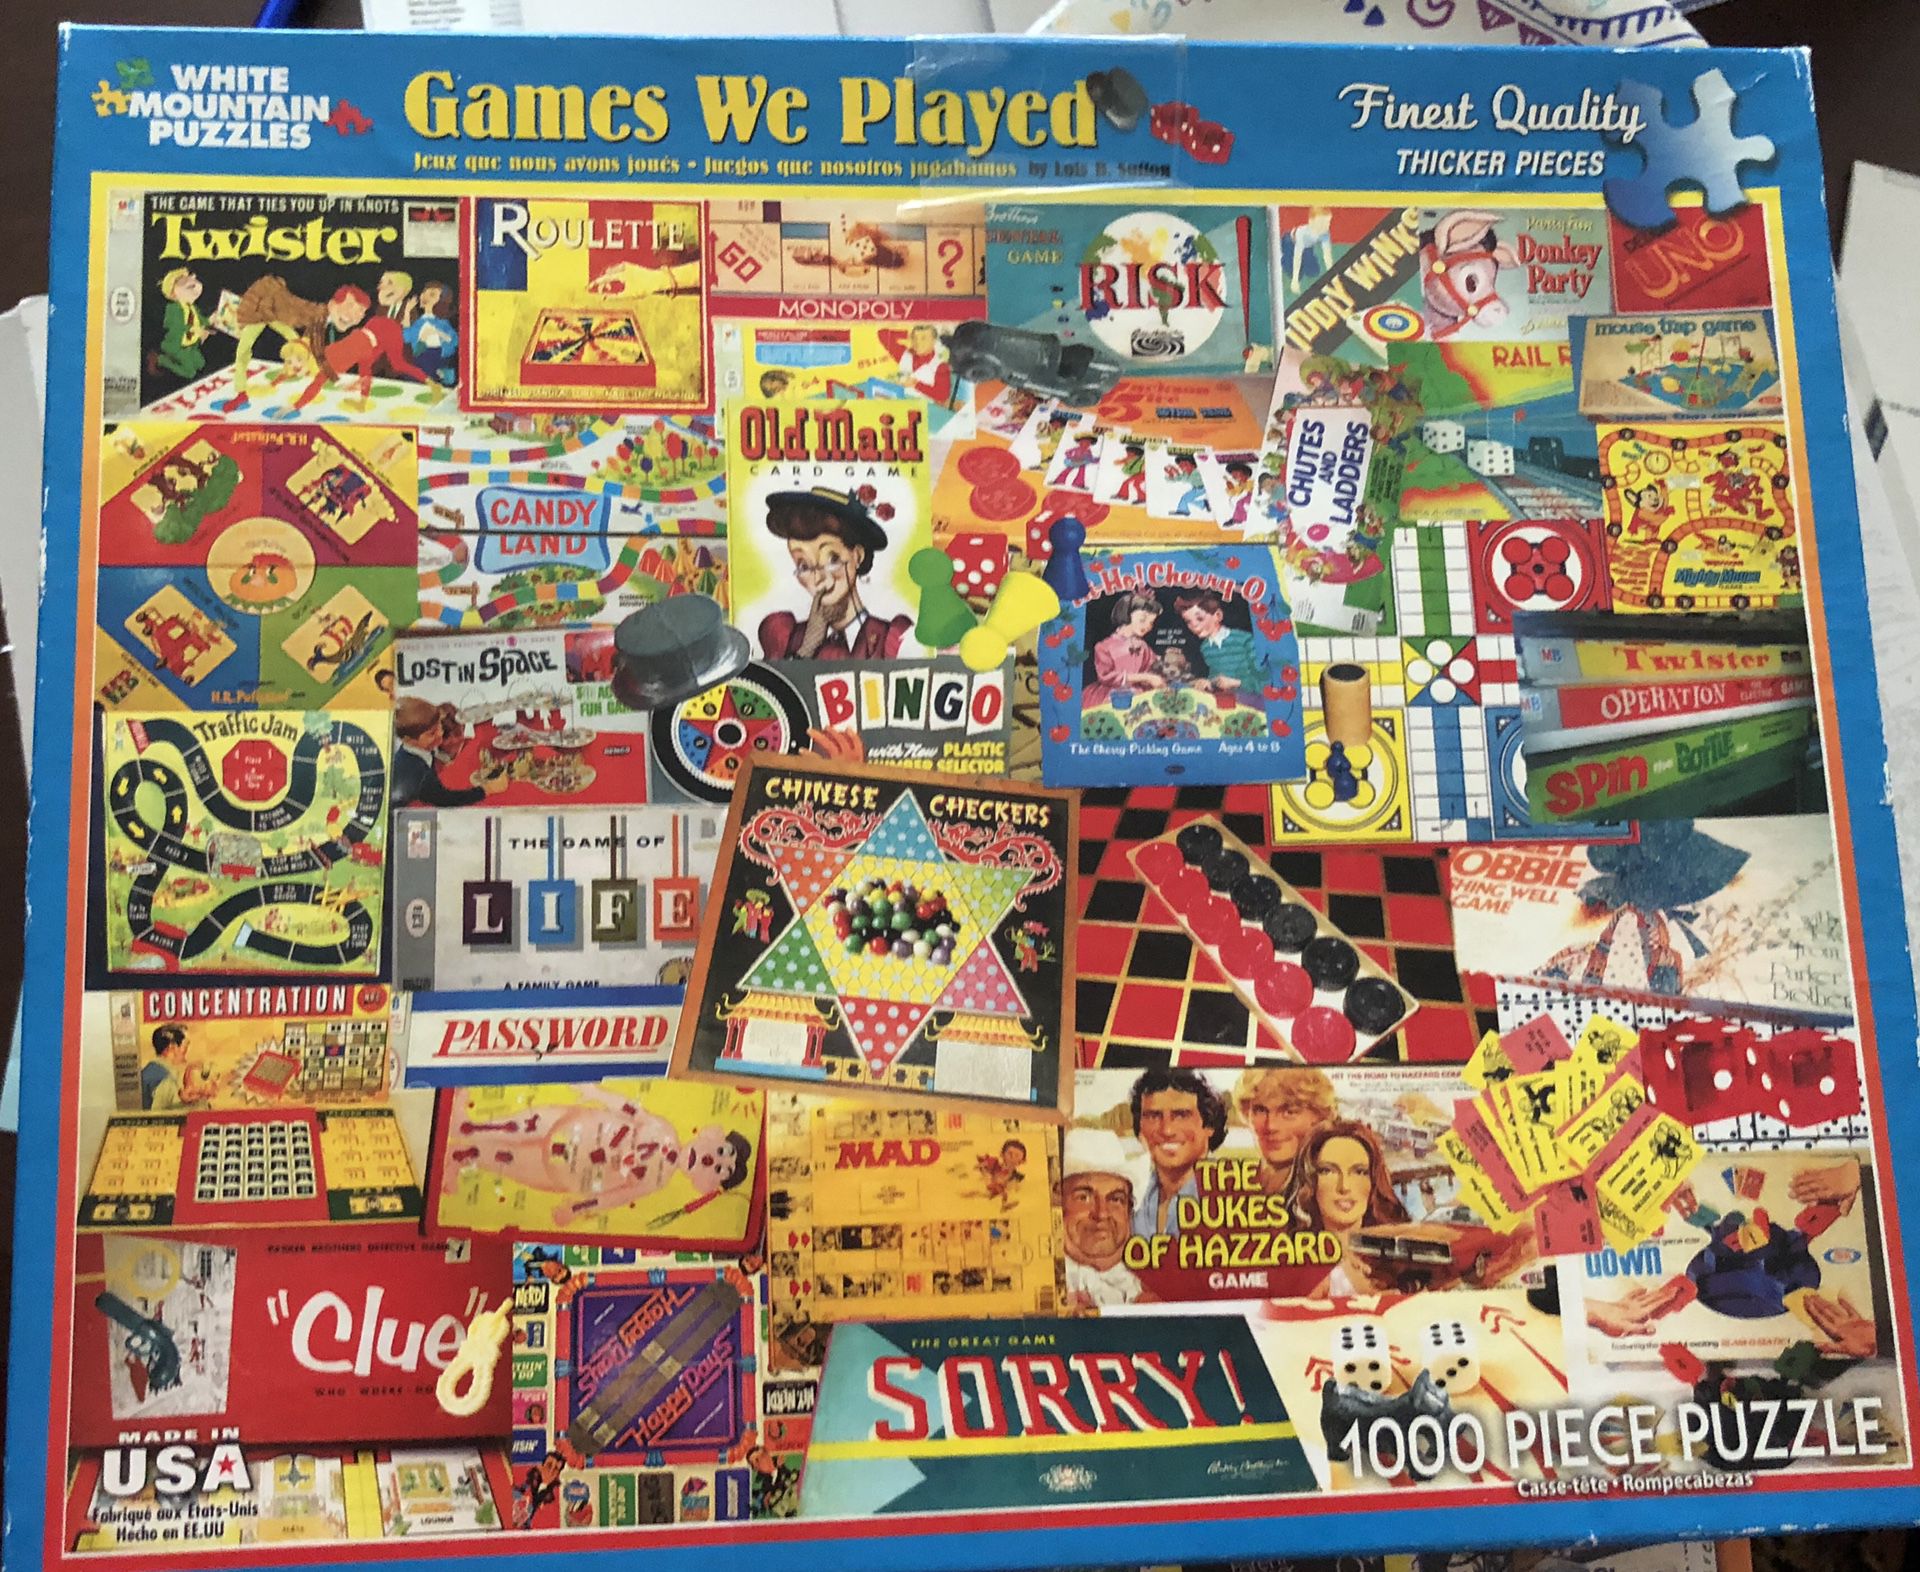 White Mountain 1000 pc puzzle “Games We Played”